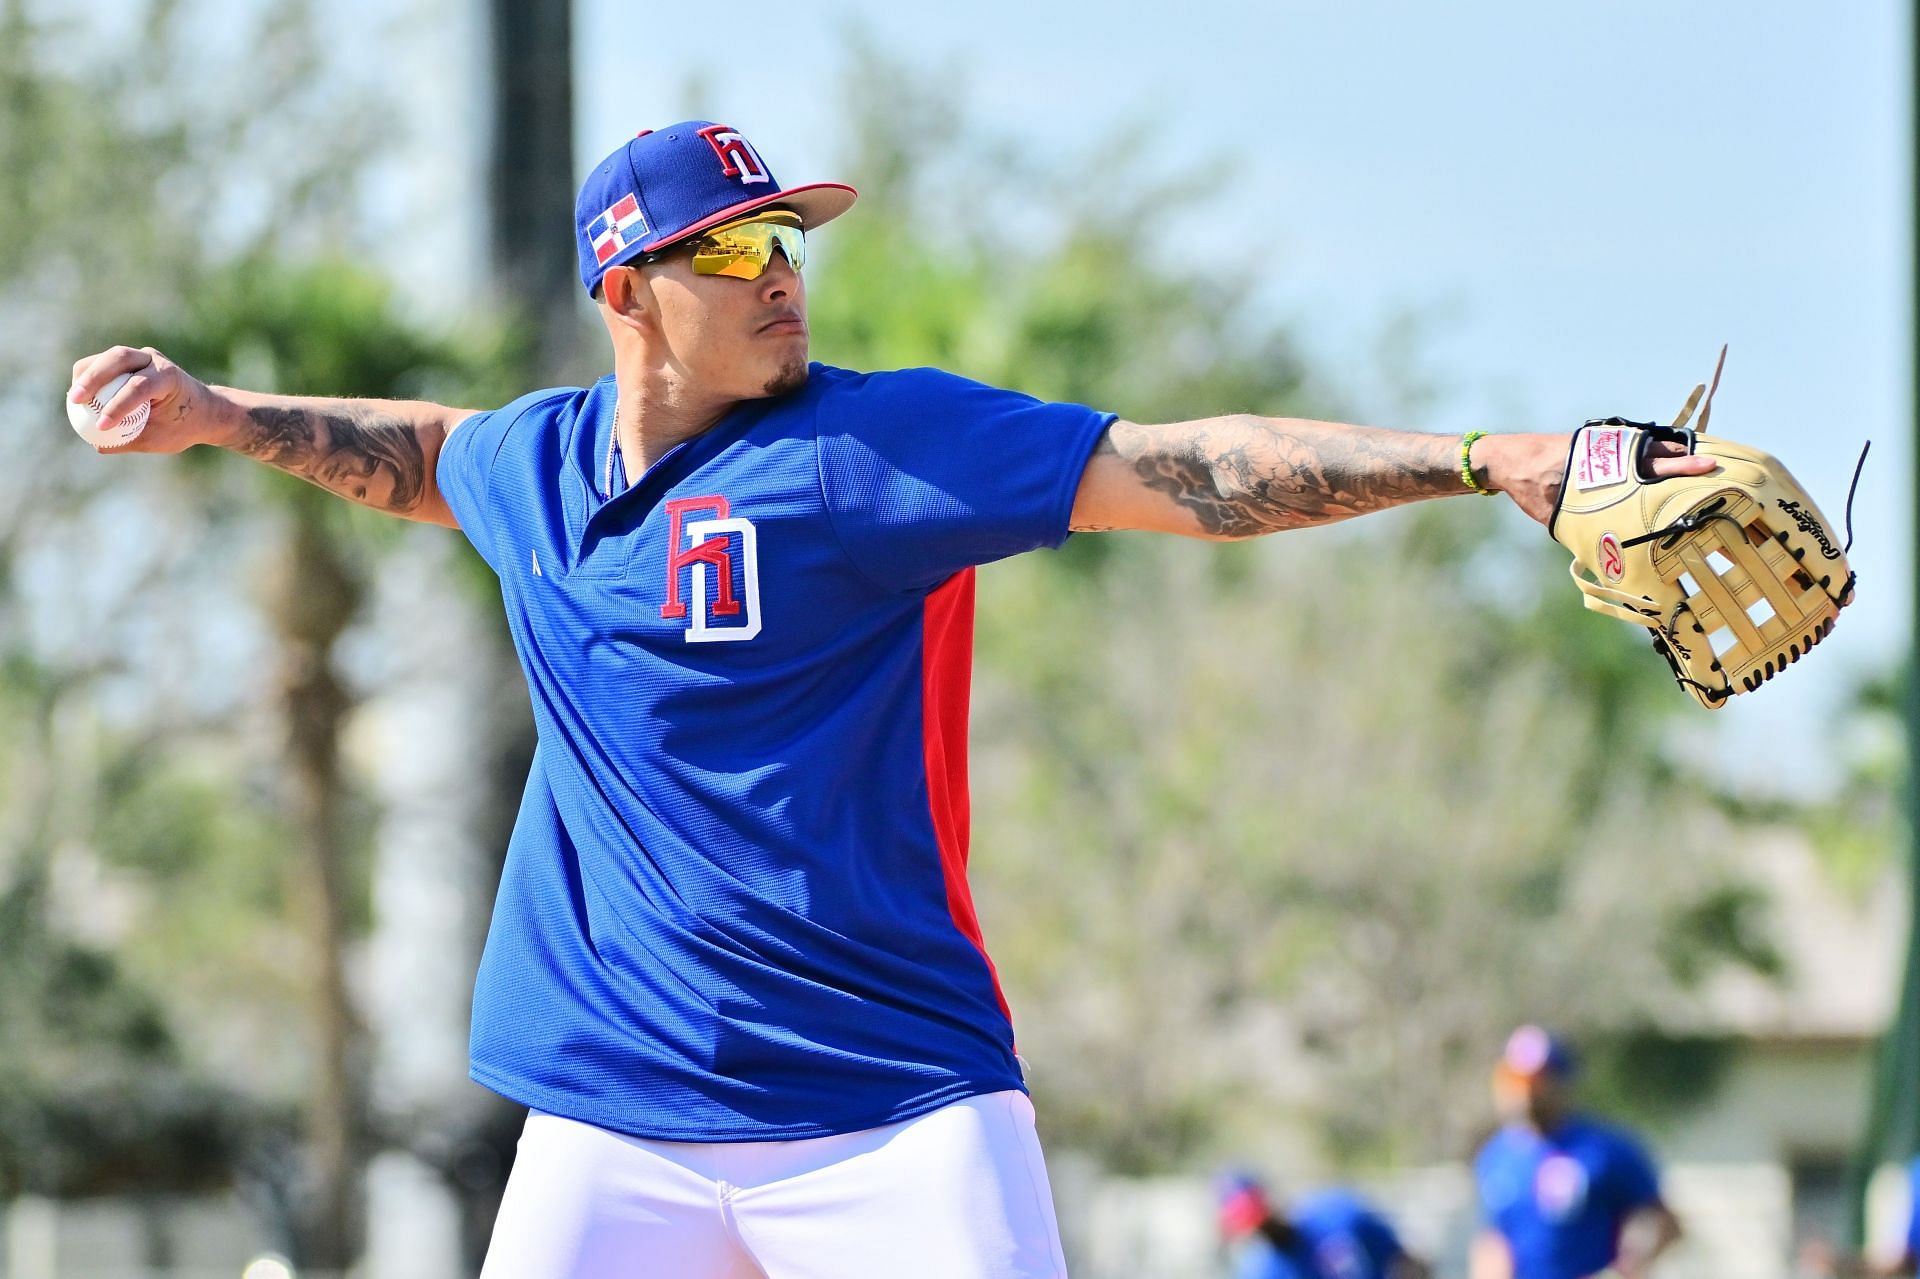 Dominican Republic Workout Day: FORT MYERS, FLORIDA - MARCH 07: Manny Machado #13 of the Dominican Republic works out during the Dominican Republic National Baseball Team workout day at Lee County Sports Complex on March 07, 2023 in Fort Myers, Florida. (Photo by Julio Aguilar/Getty Images)